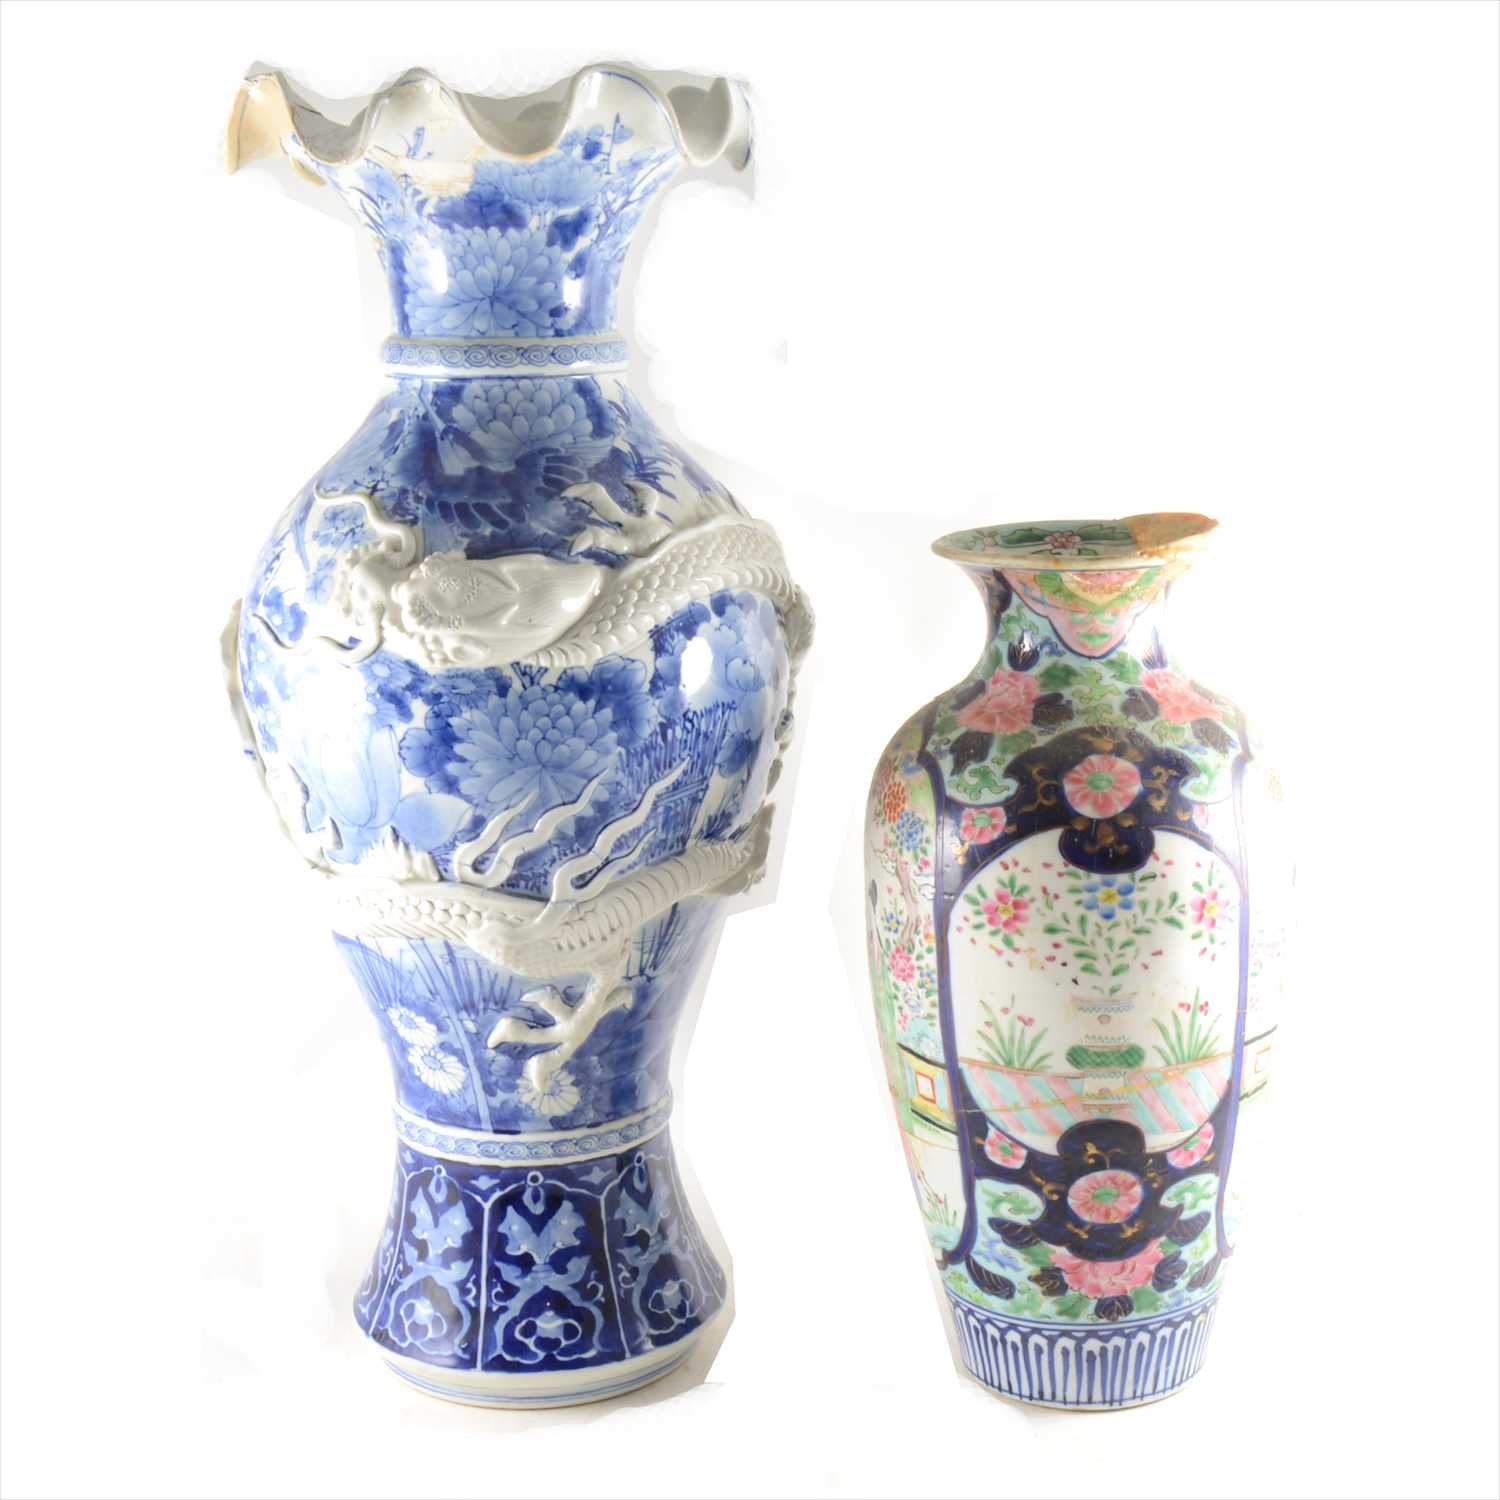 Lot 11 - A large Japanese blue and white vase; and a polychrome vase